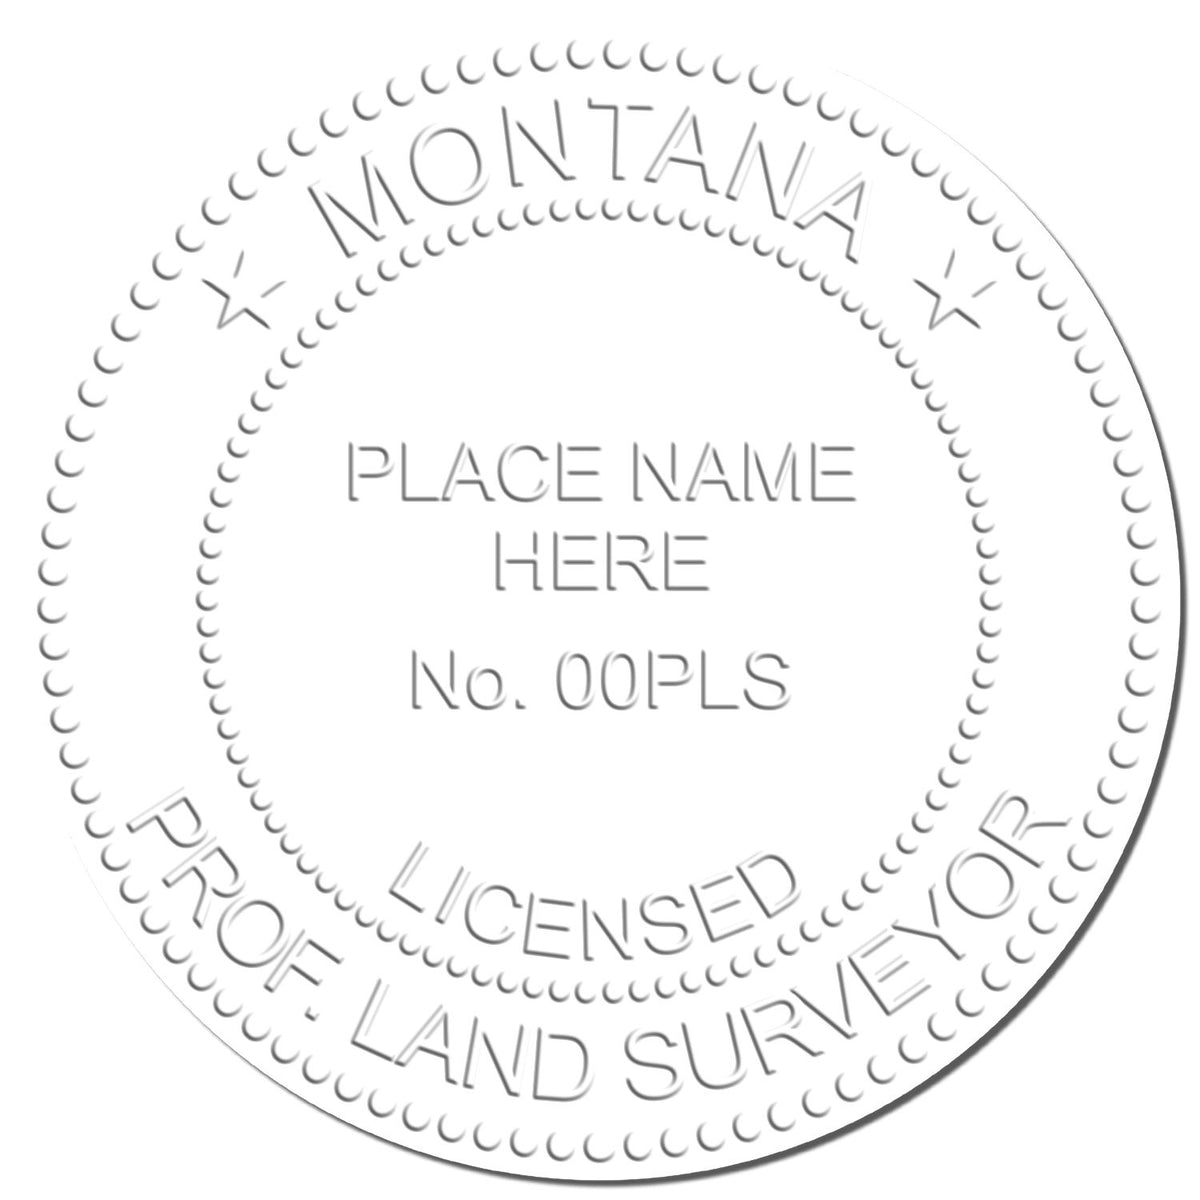 This paper is stamped with a sample imprint of the State of Montana Soft Land Surveyor Embossing Seal, signifying its quality and reliability.